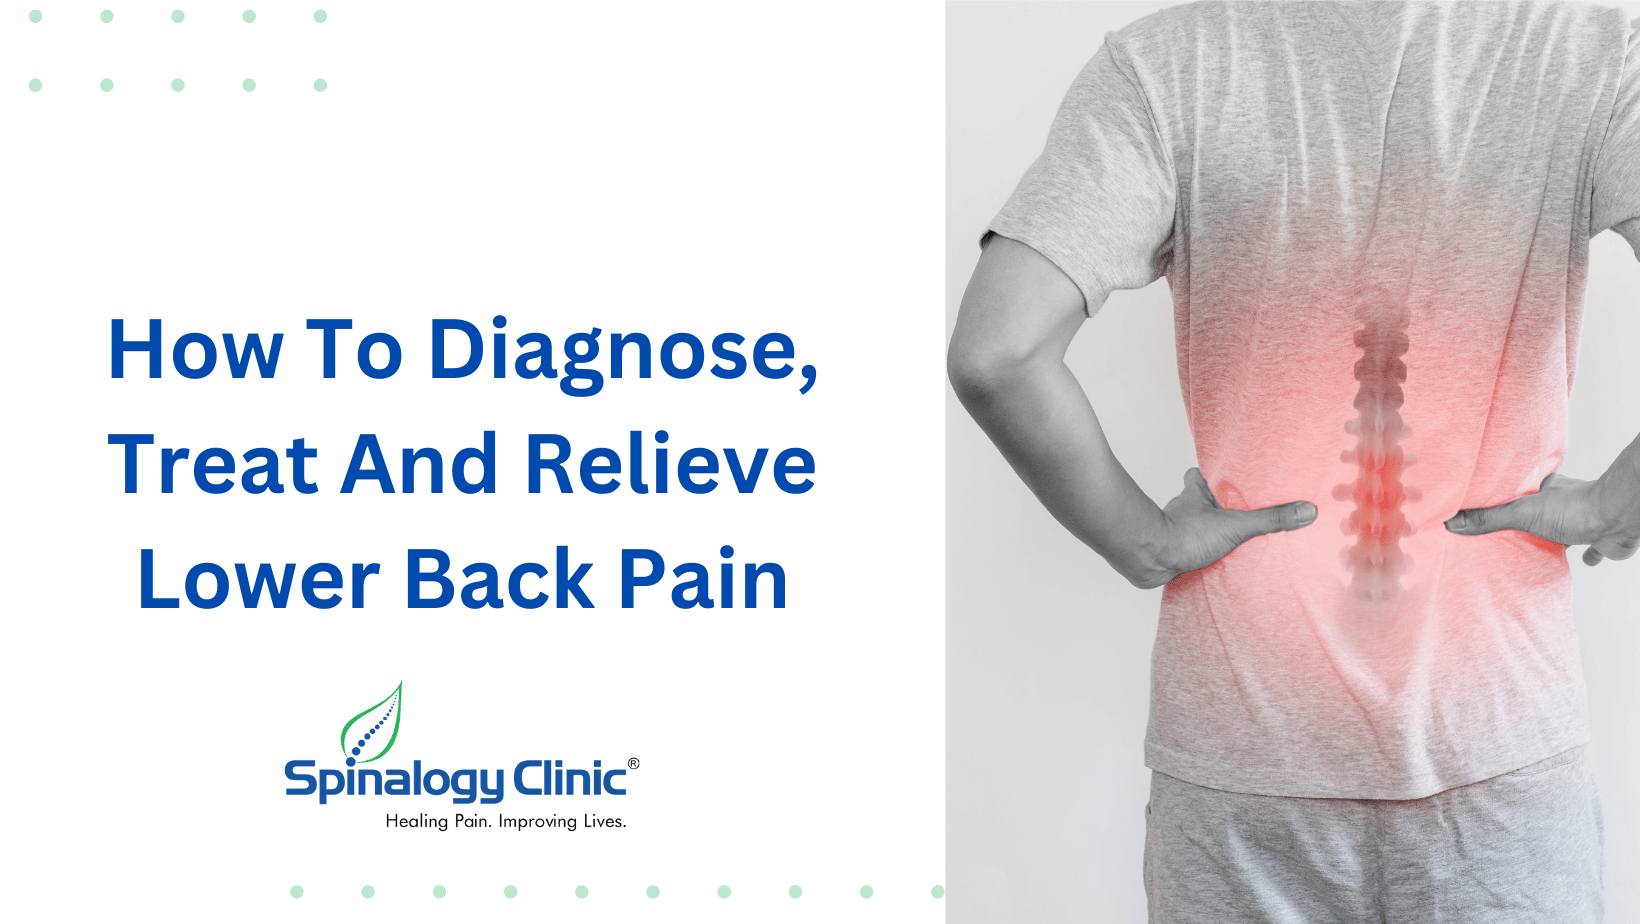 How To Treat, Diagnose And Relieve Lower Back Pain